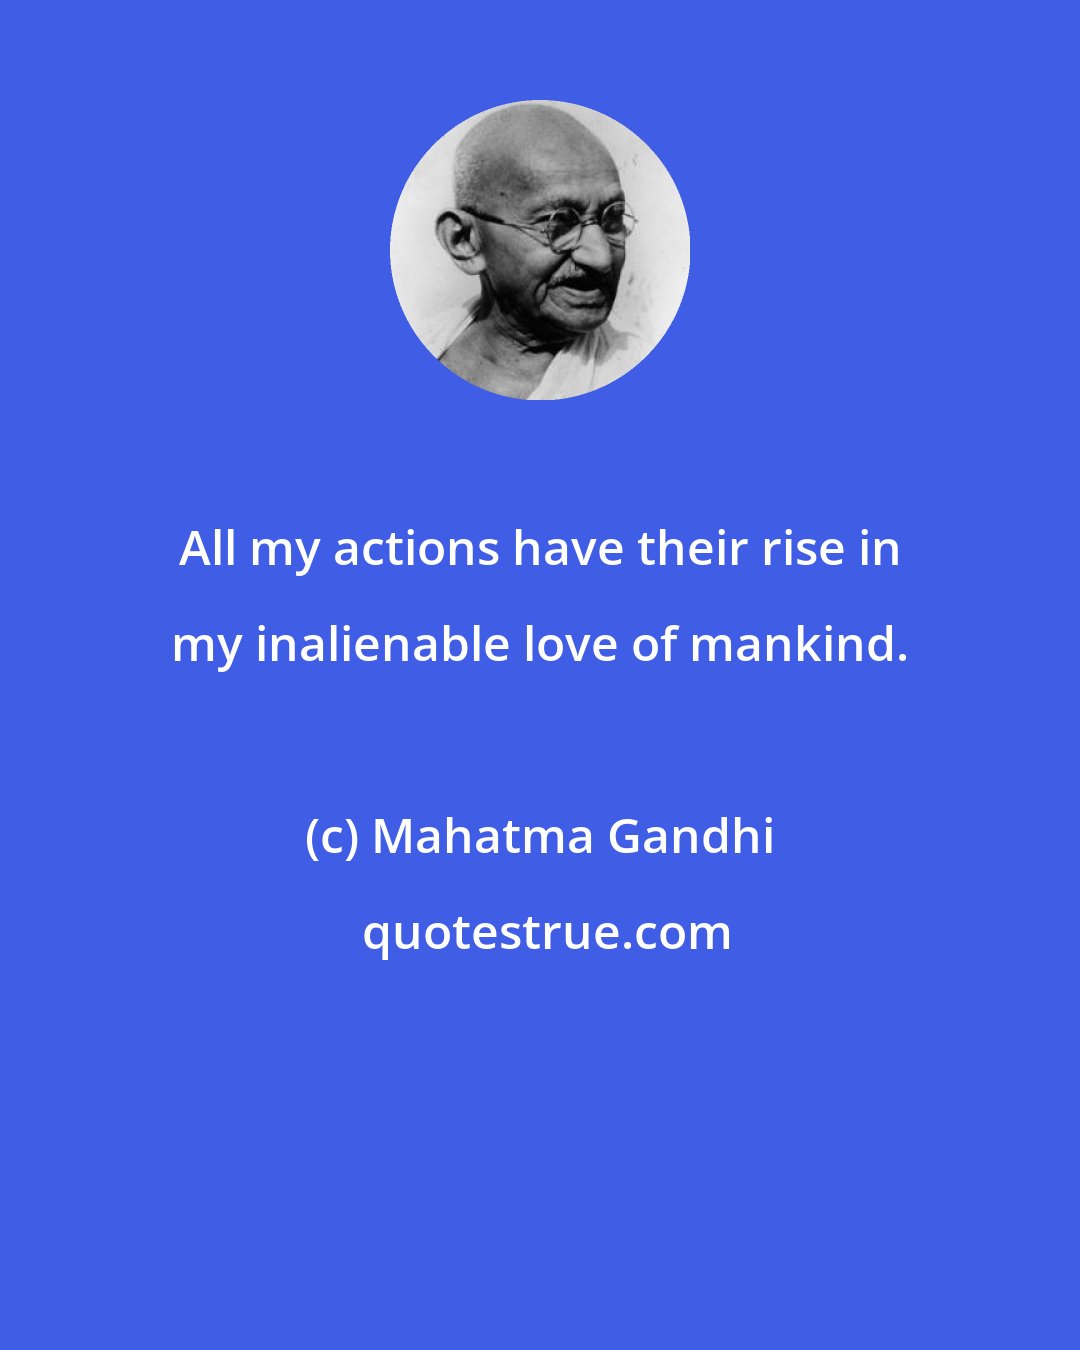 Mahatma Gandhi: All my actions have their rise in my inalienable love of mankind.